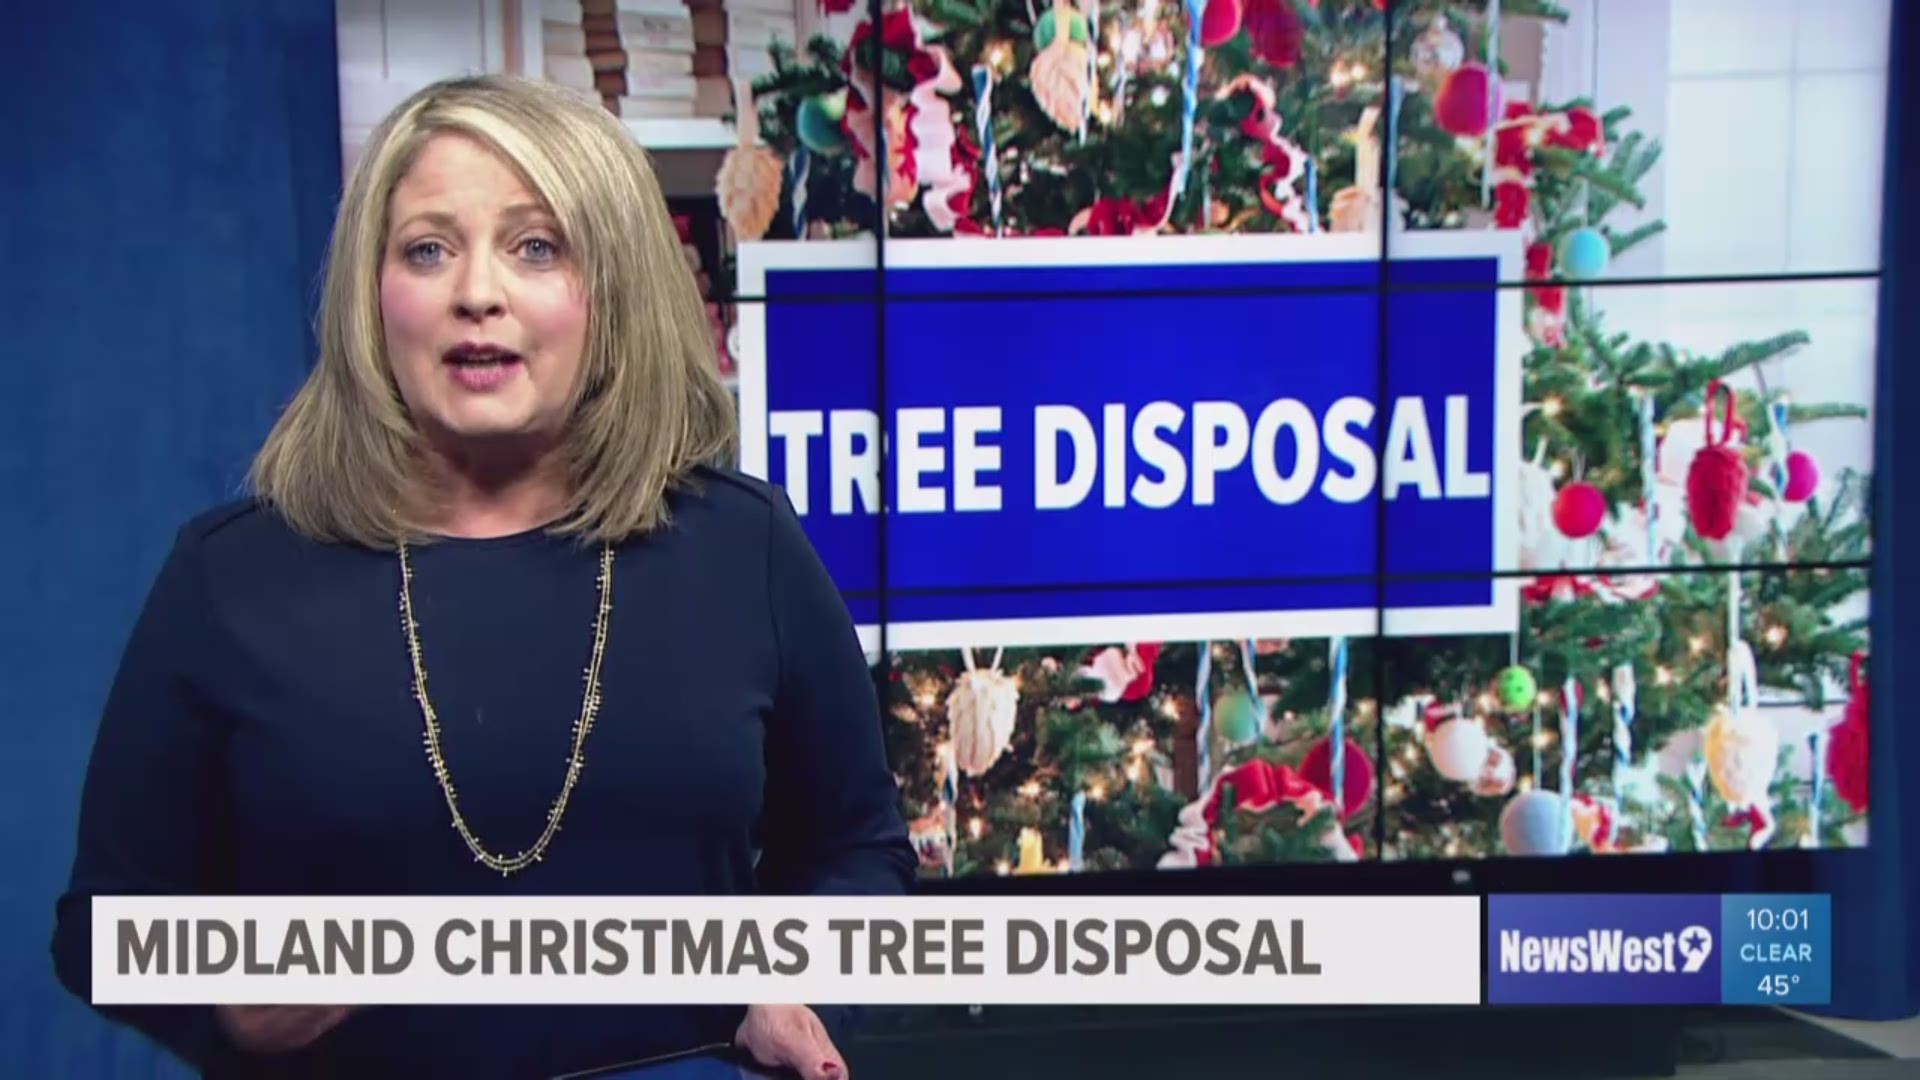 The City is asking you recycle those Christmas trees so they can be reused